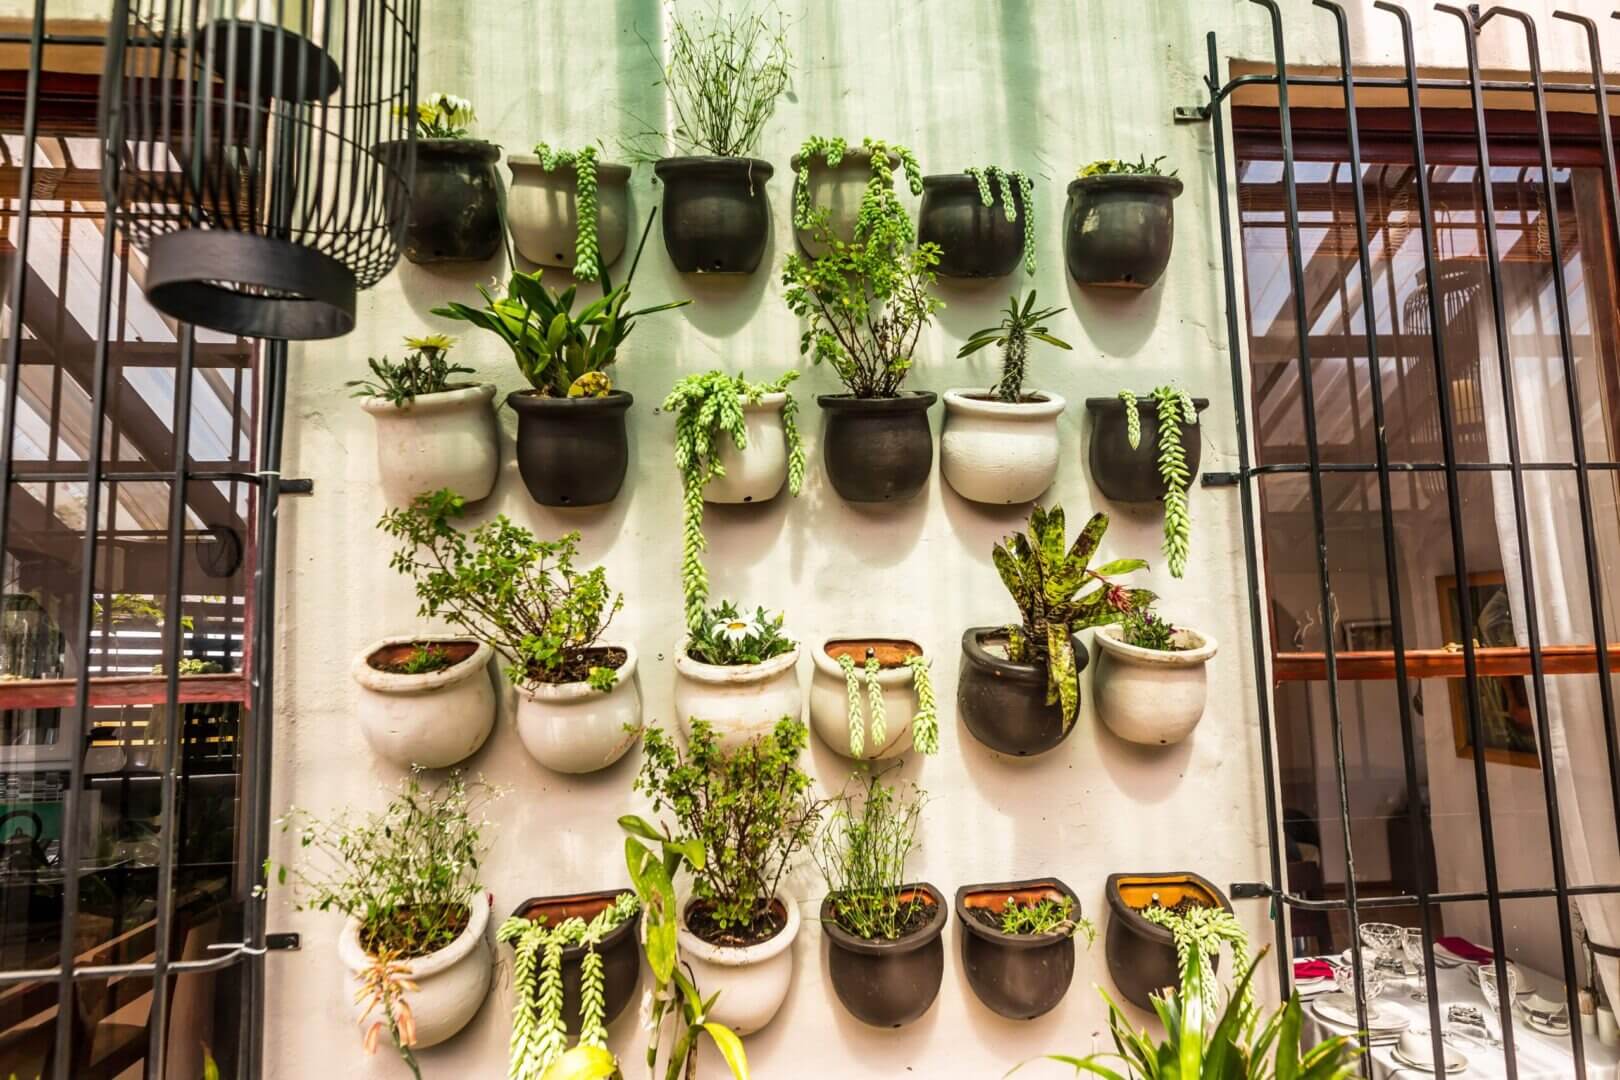 A wall of plants in pots on the side of a building.